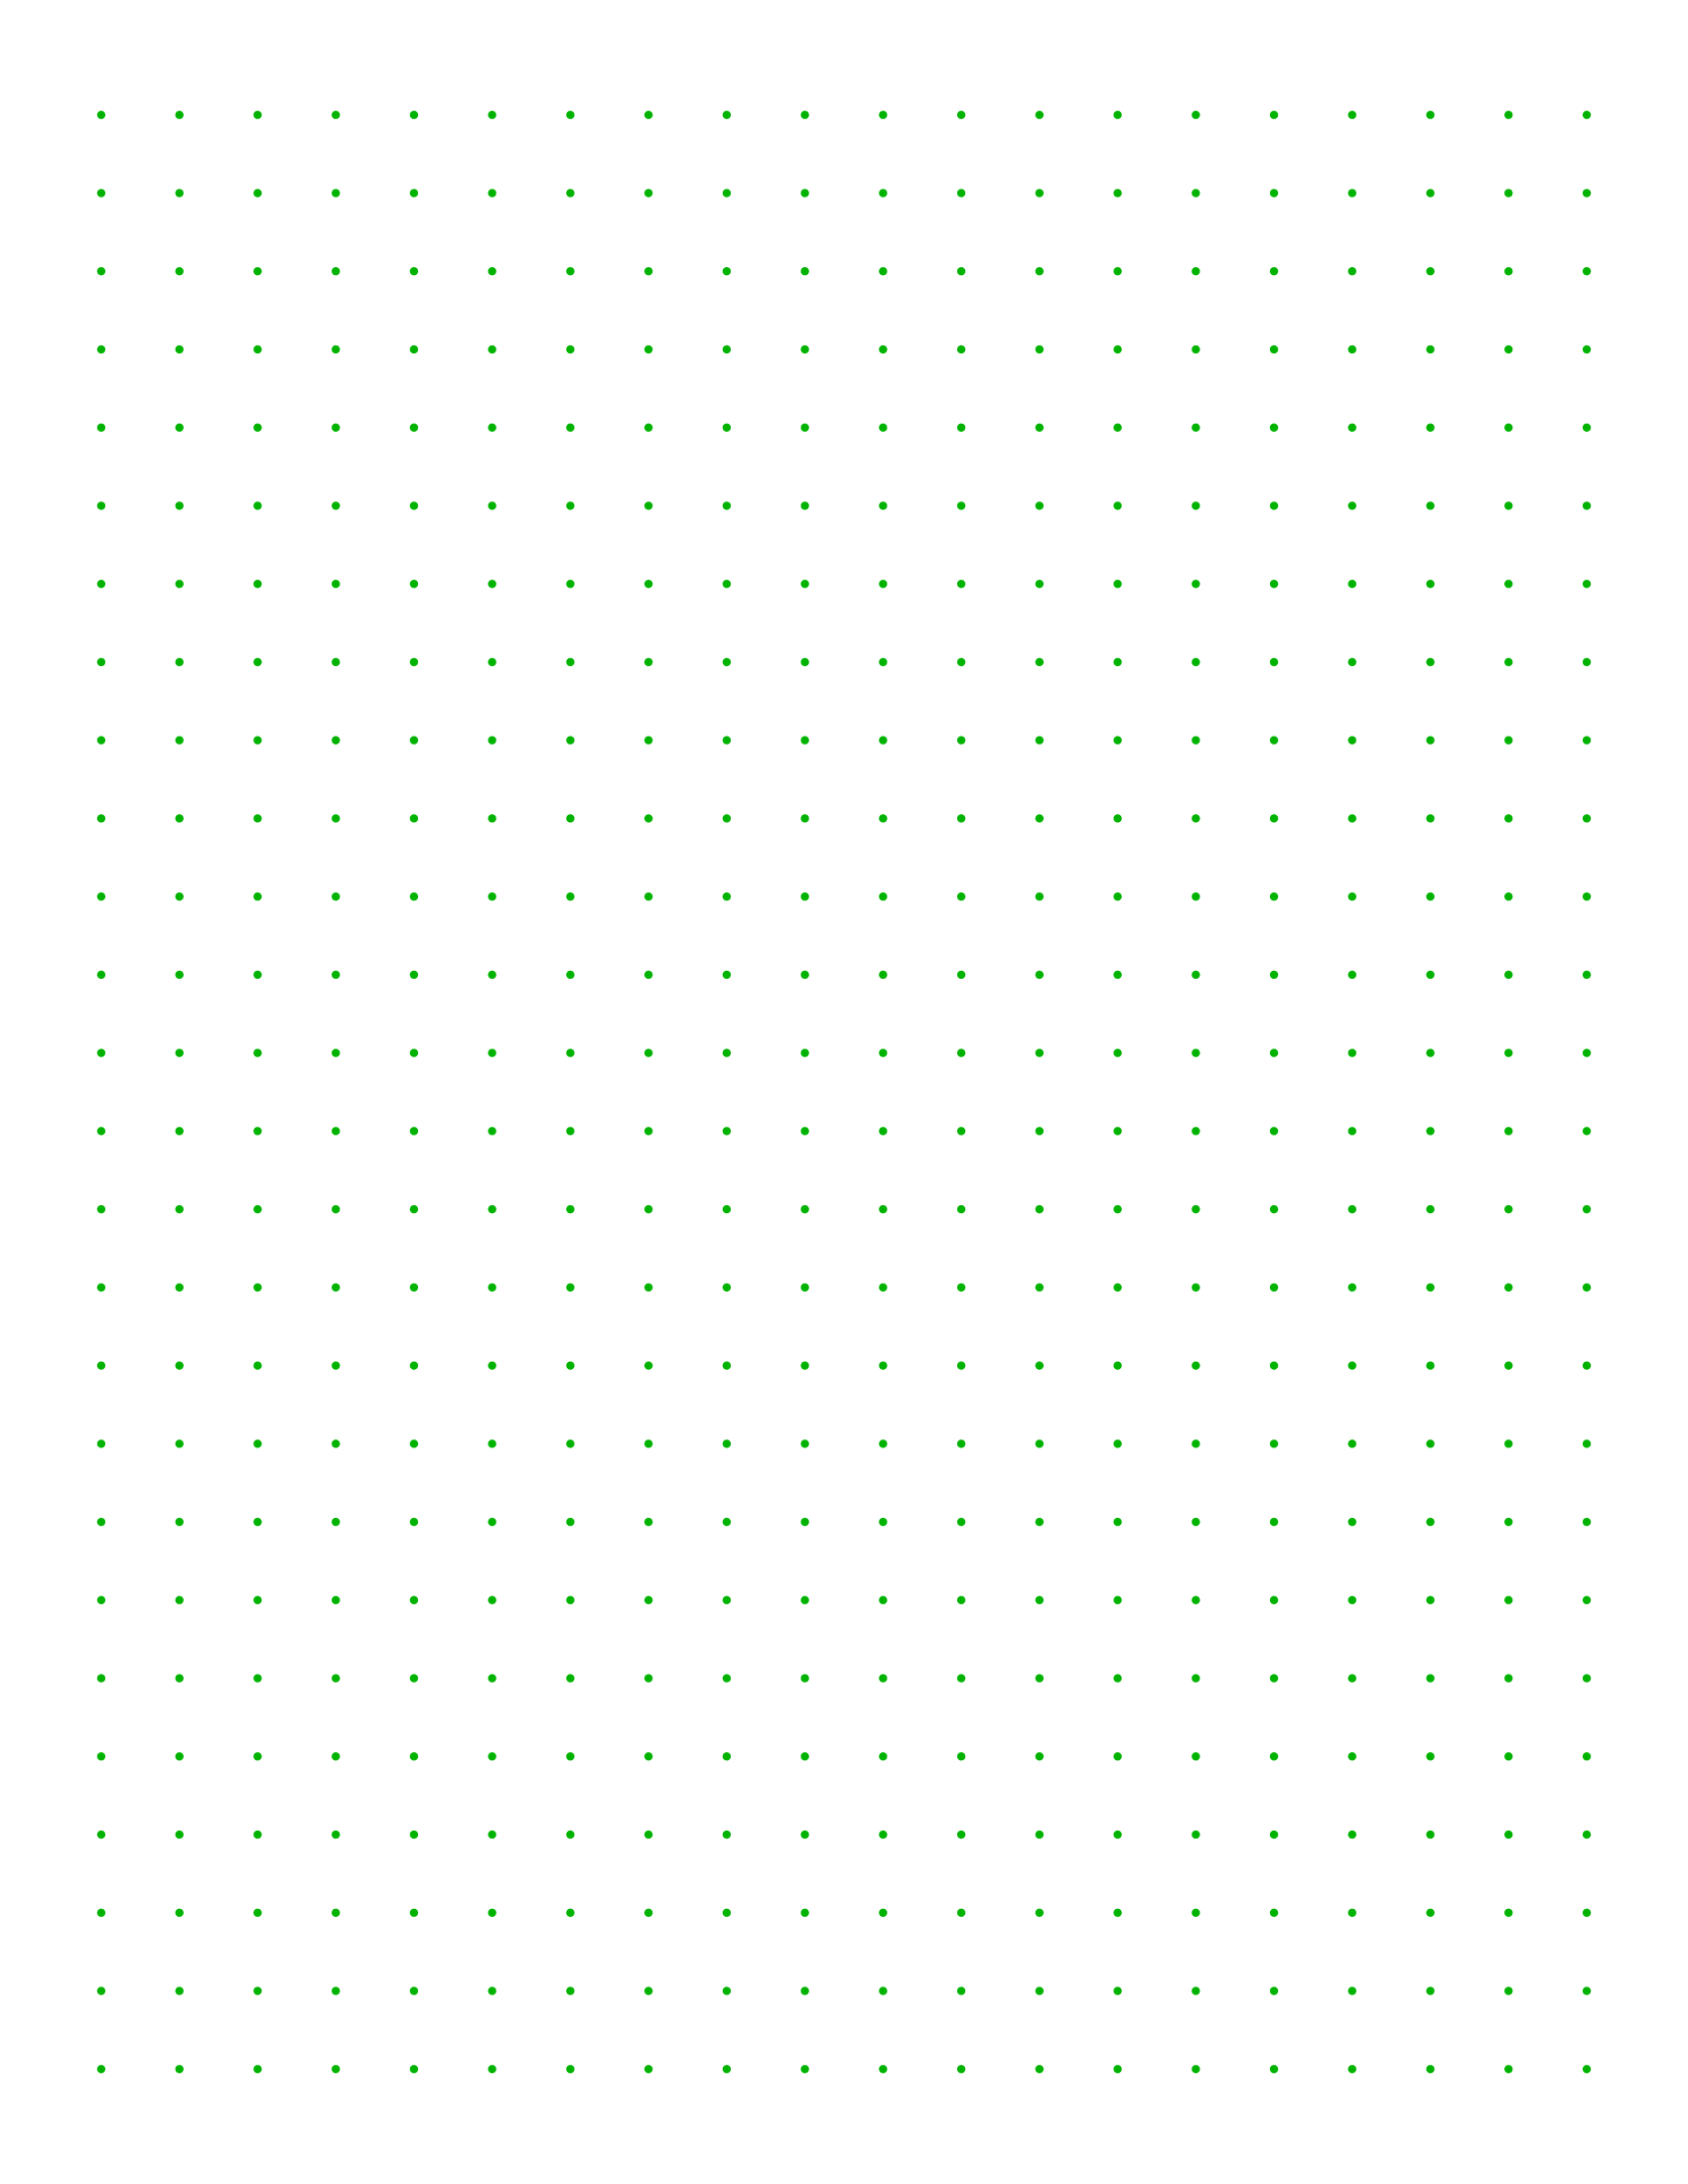 Printable Dotted Lined Paper Pdf Get What You Need For Free